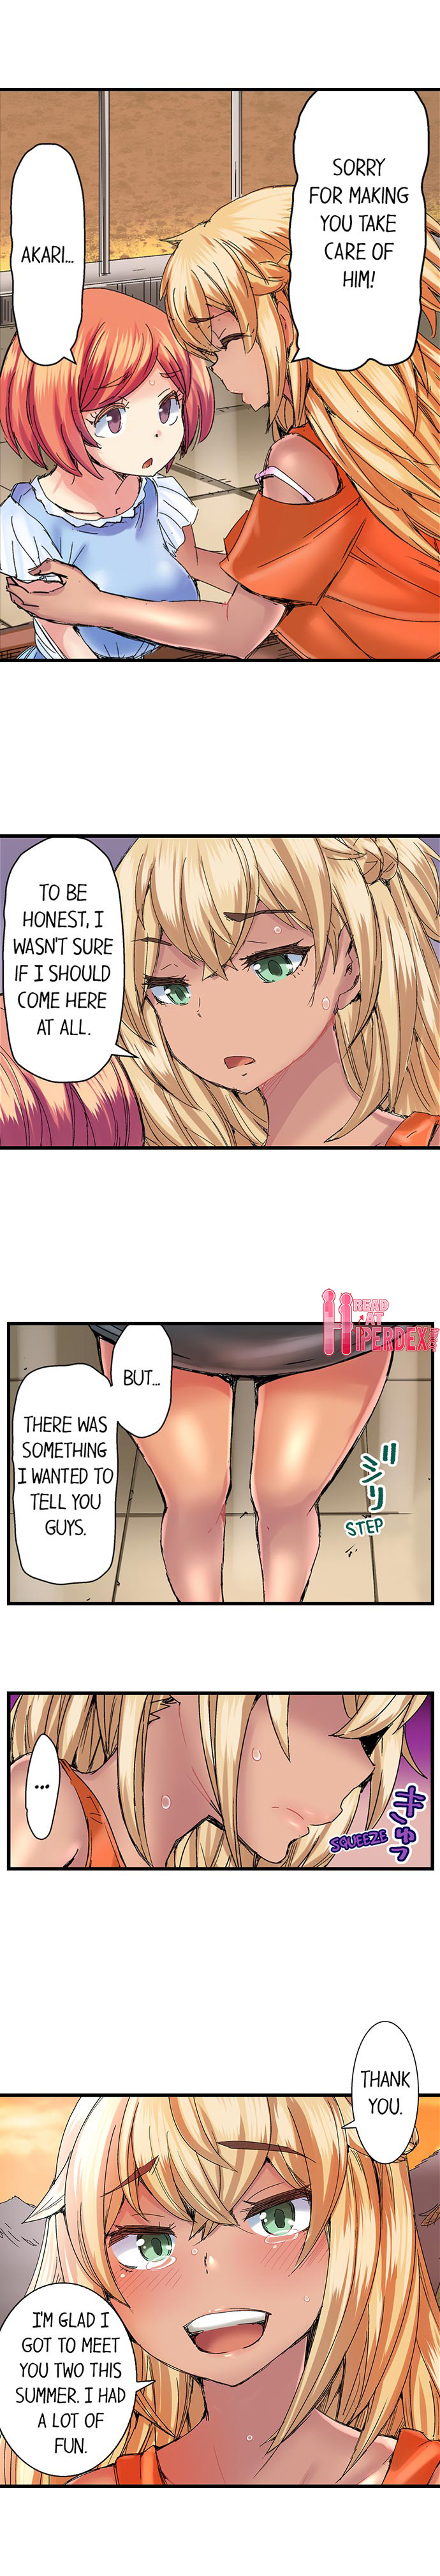 Taking a Hot Tanned Chick’s Virginity - Chapter 39 Page 6